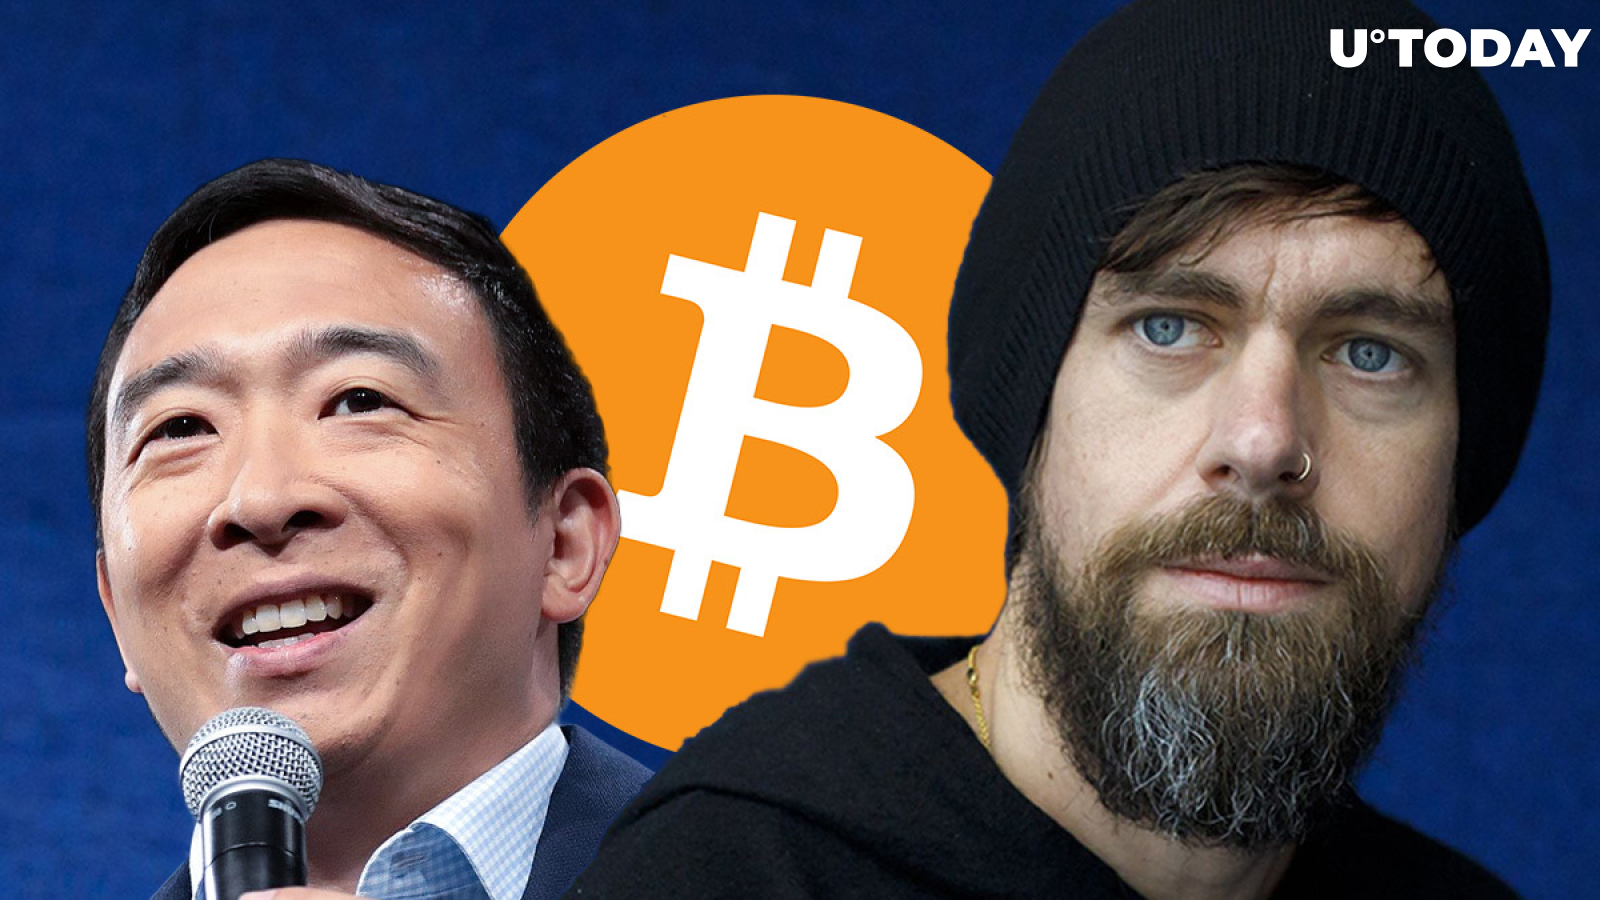 Bitcoin to Be Used for UBI? Jack Dorsey Donates $5 Mln to UBI Supporter Andrew Yang